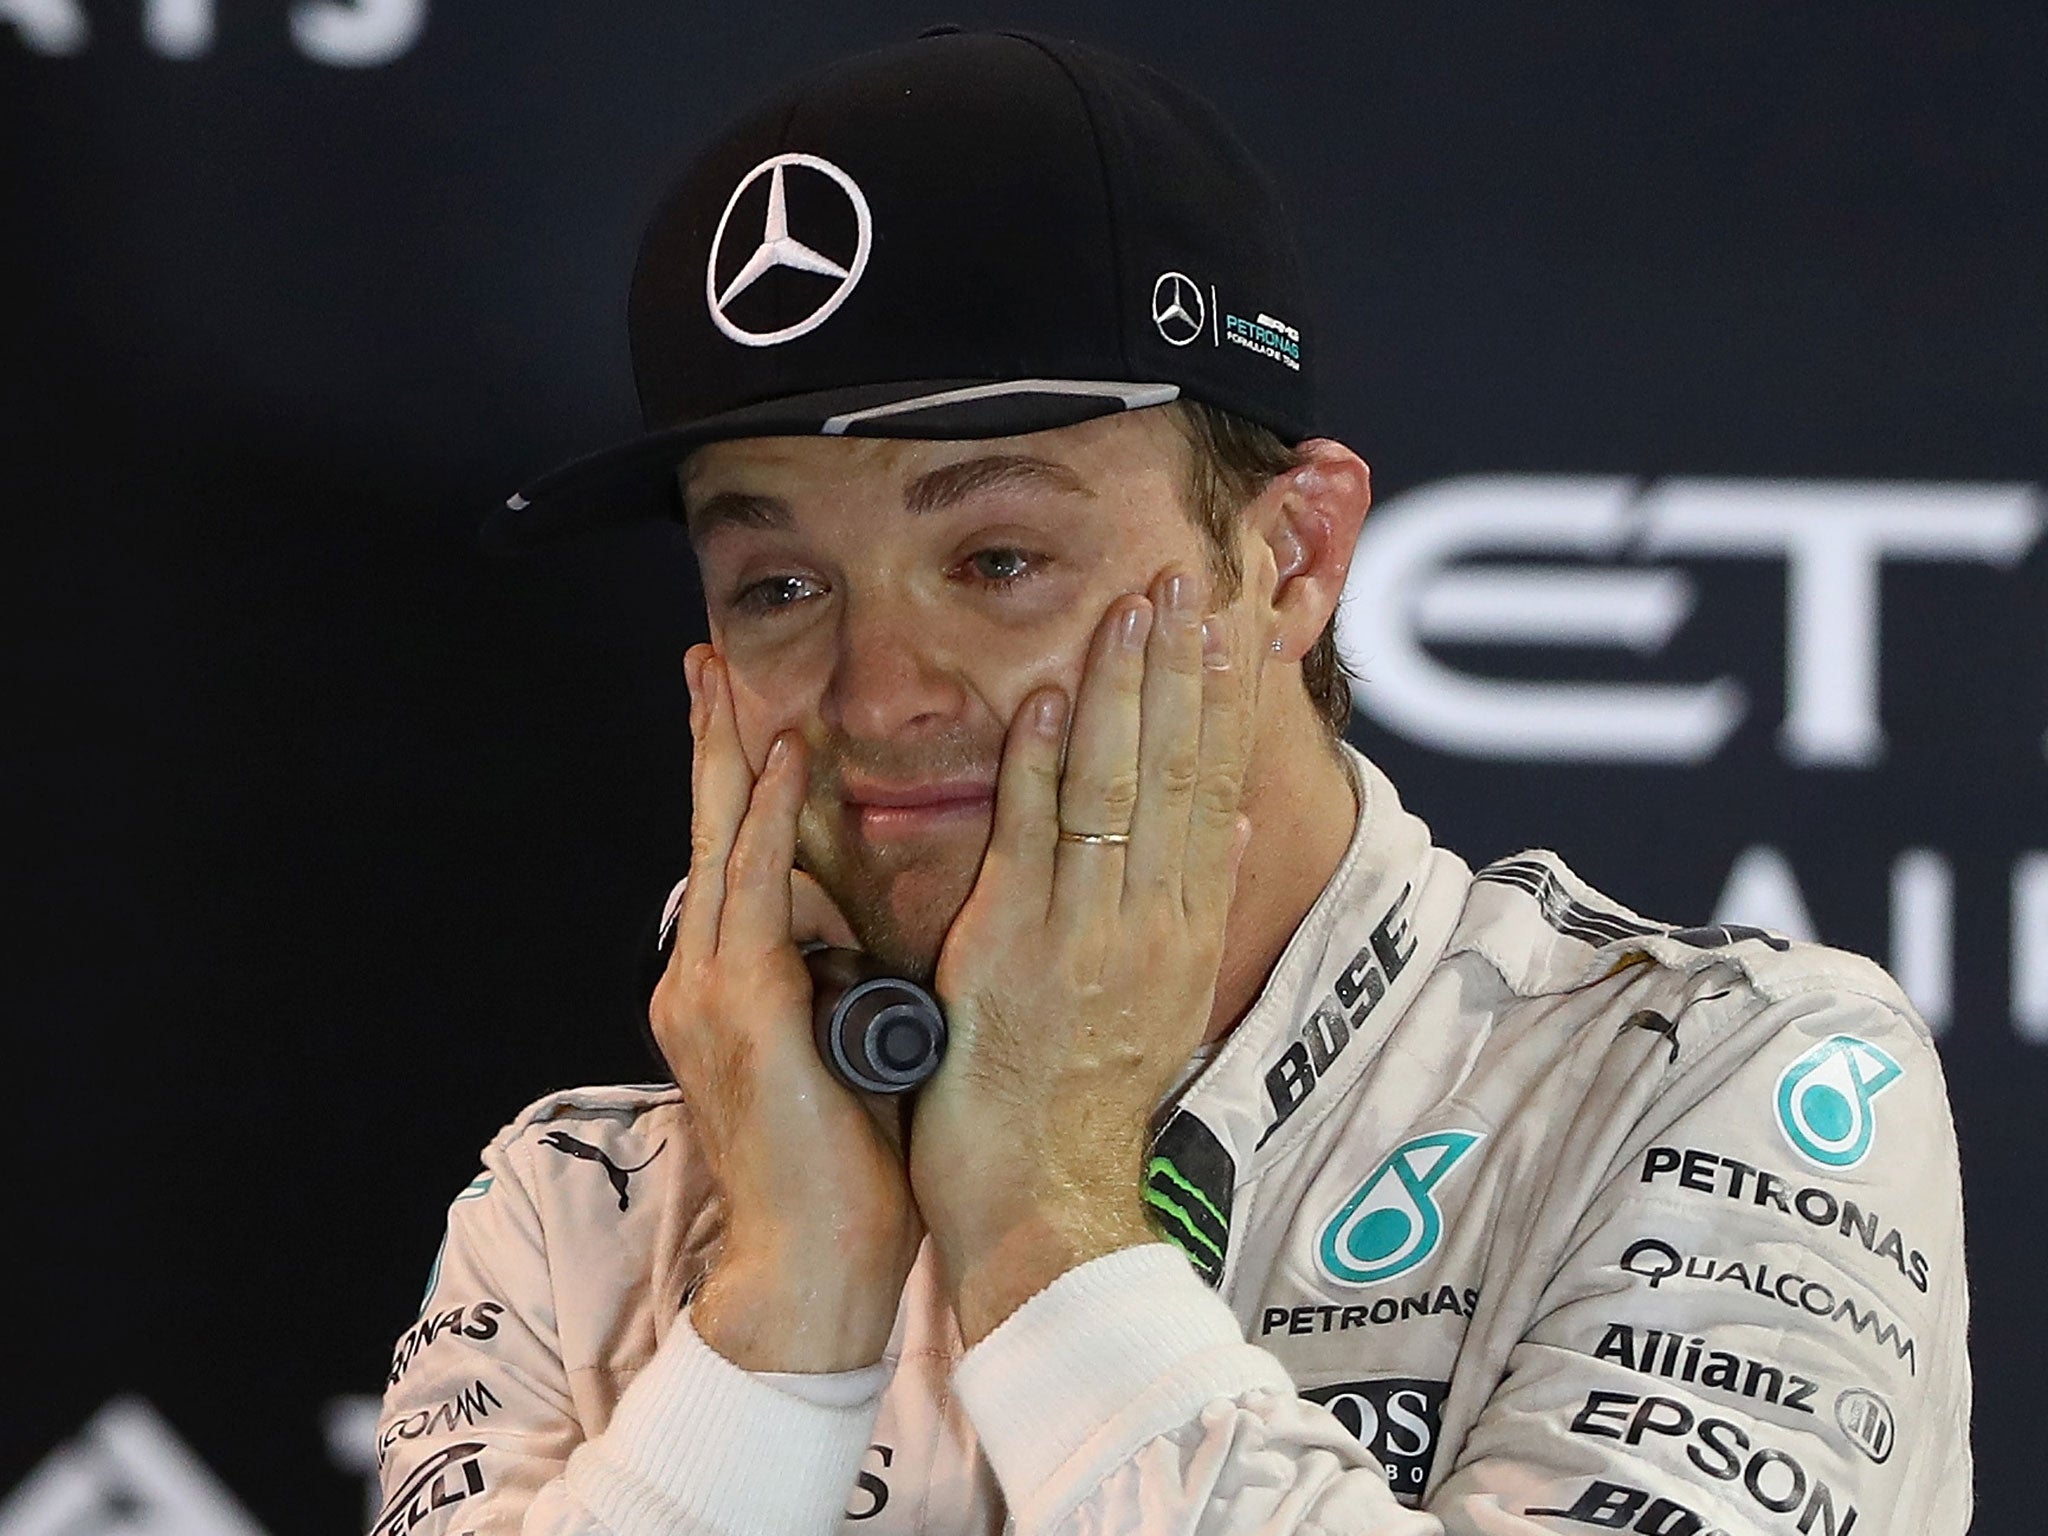 Nico Rosberg announced his shock retirement on Friday five days after winning the world championship